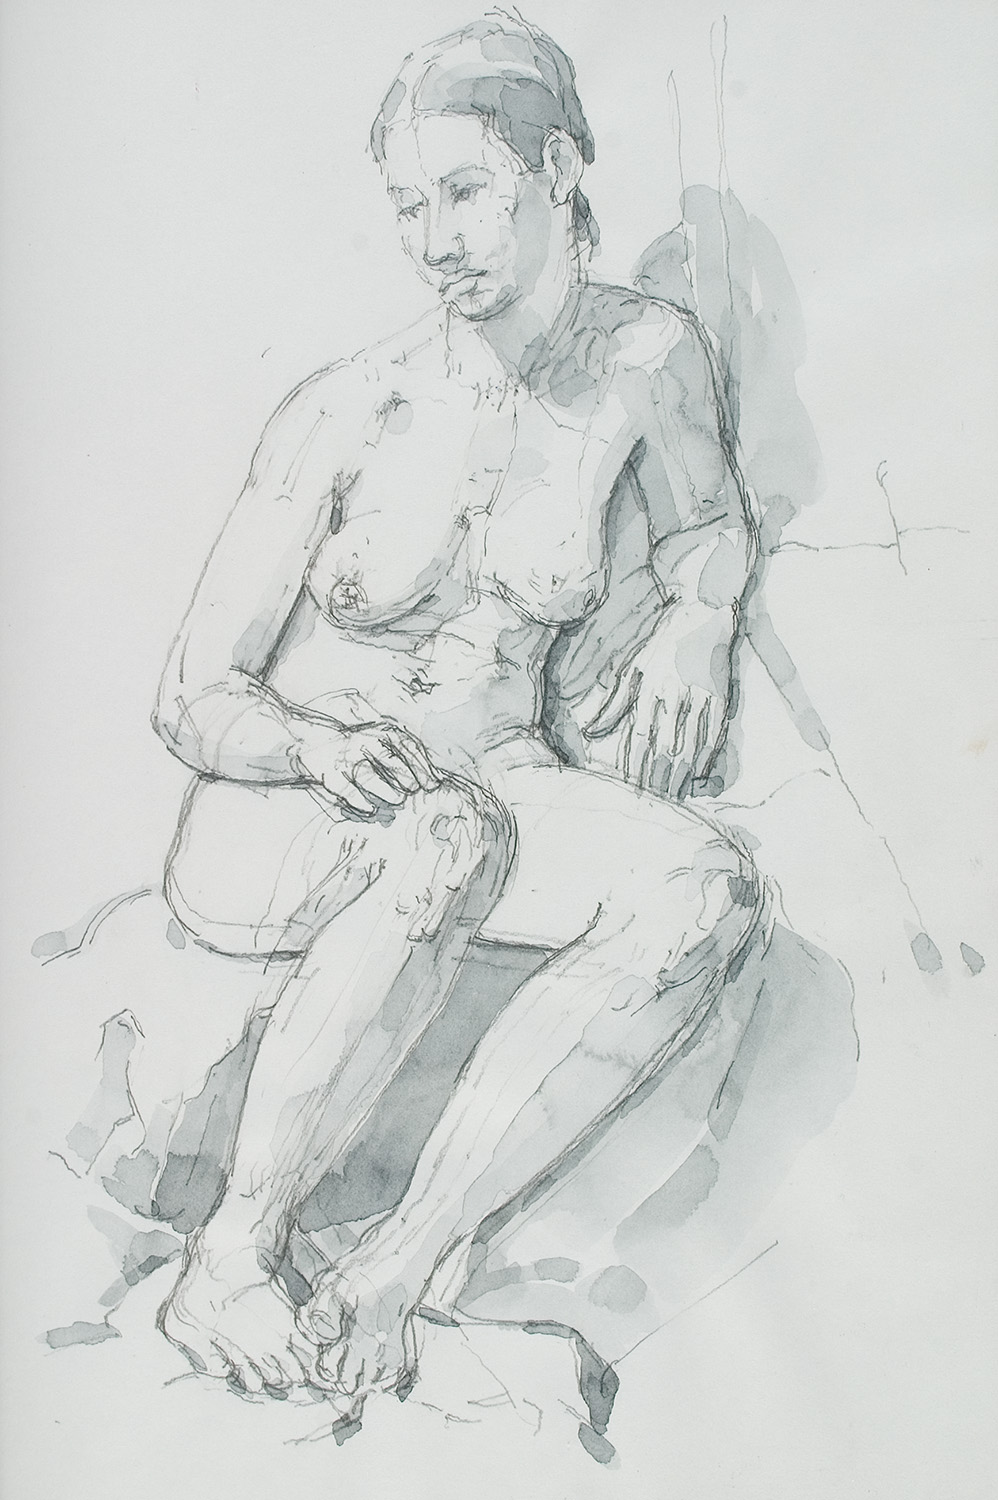 seated figure by Frederick Ortner (larger)